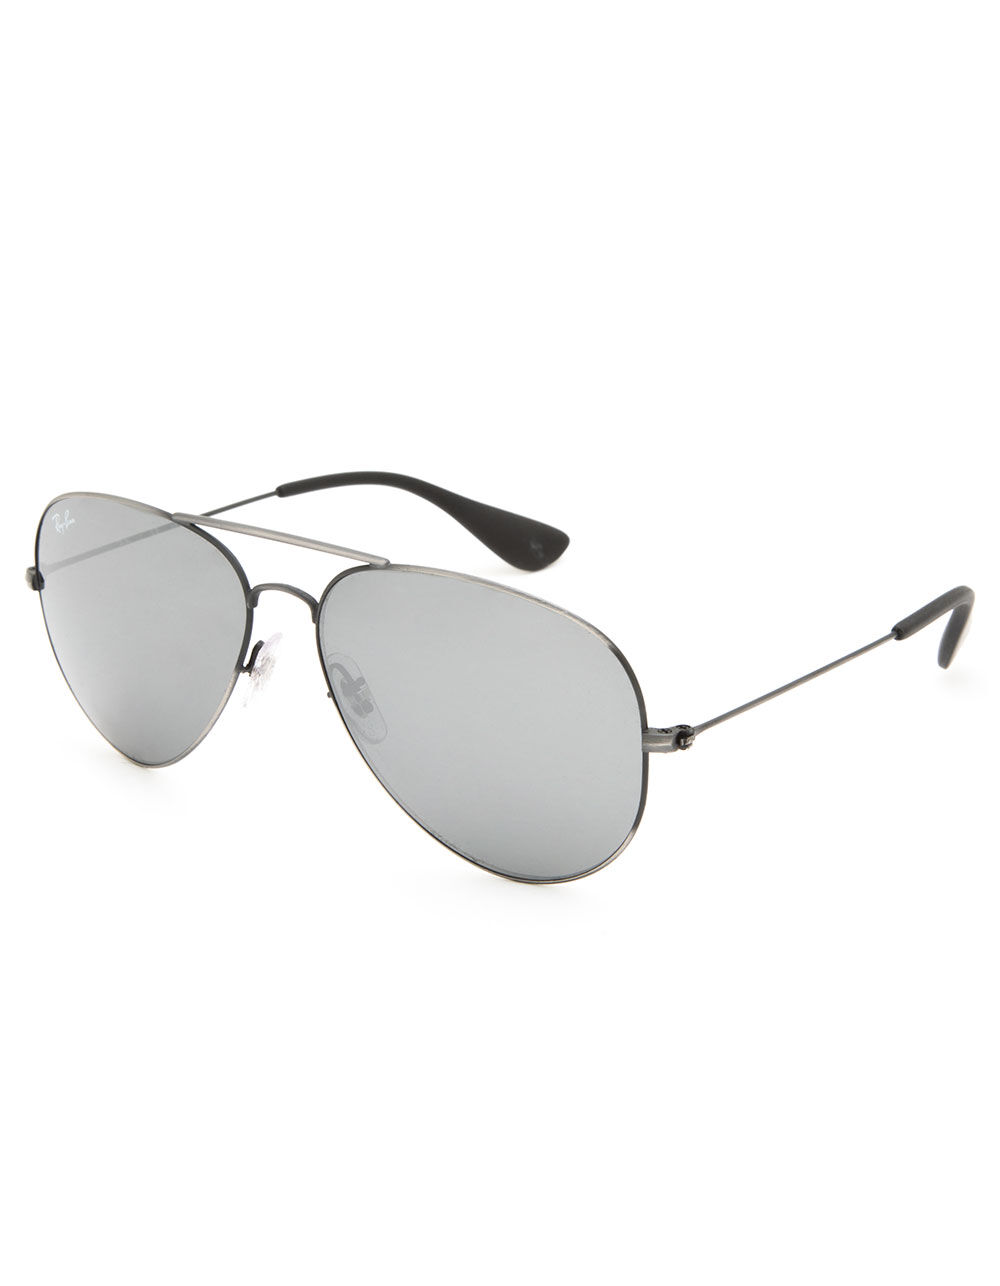 RAY-BAN Aviator Antique Black Sunglasses image number 0